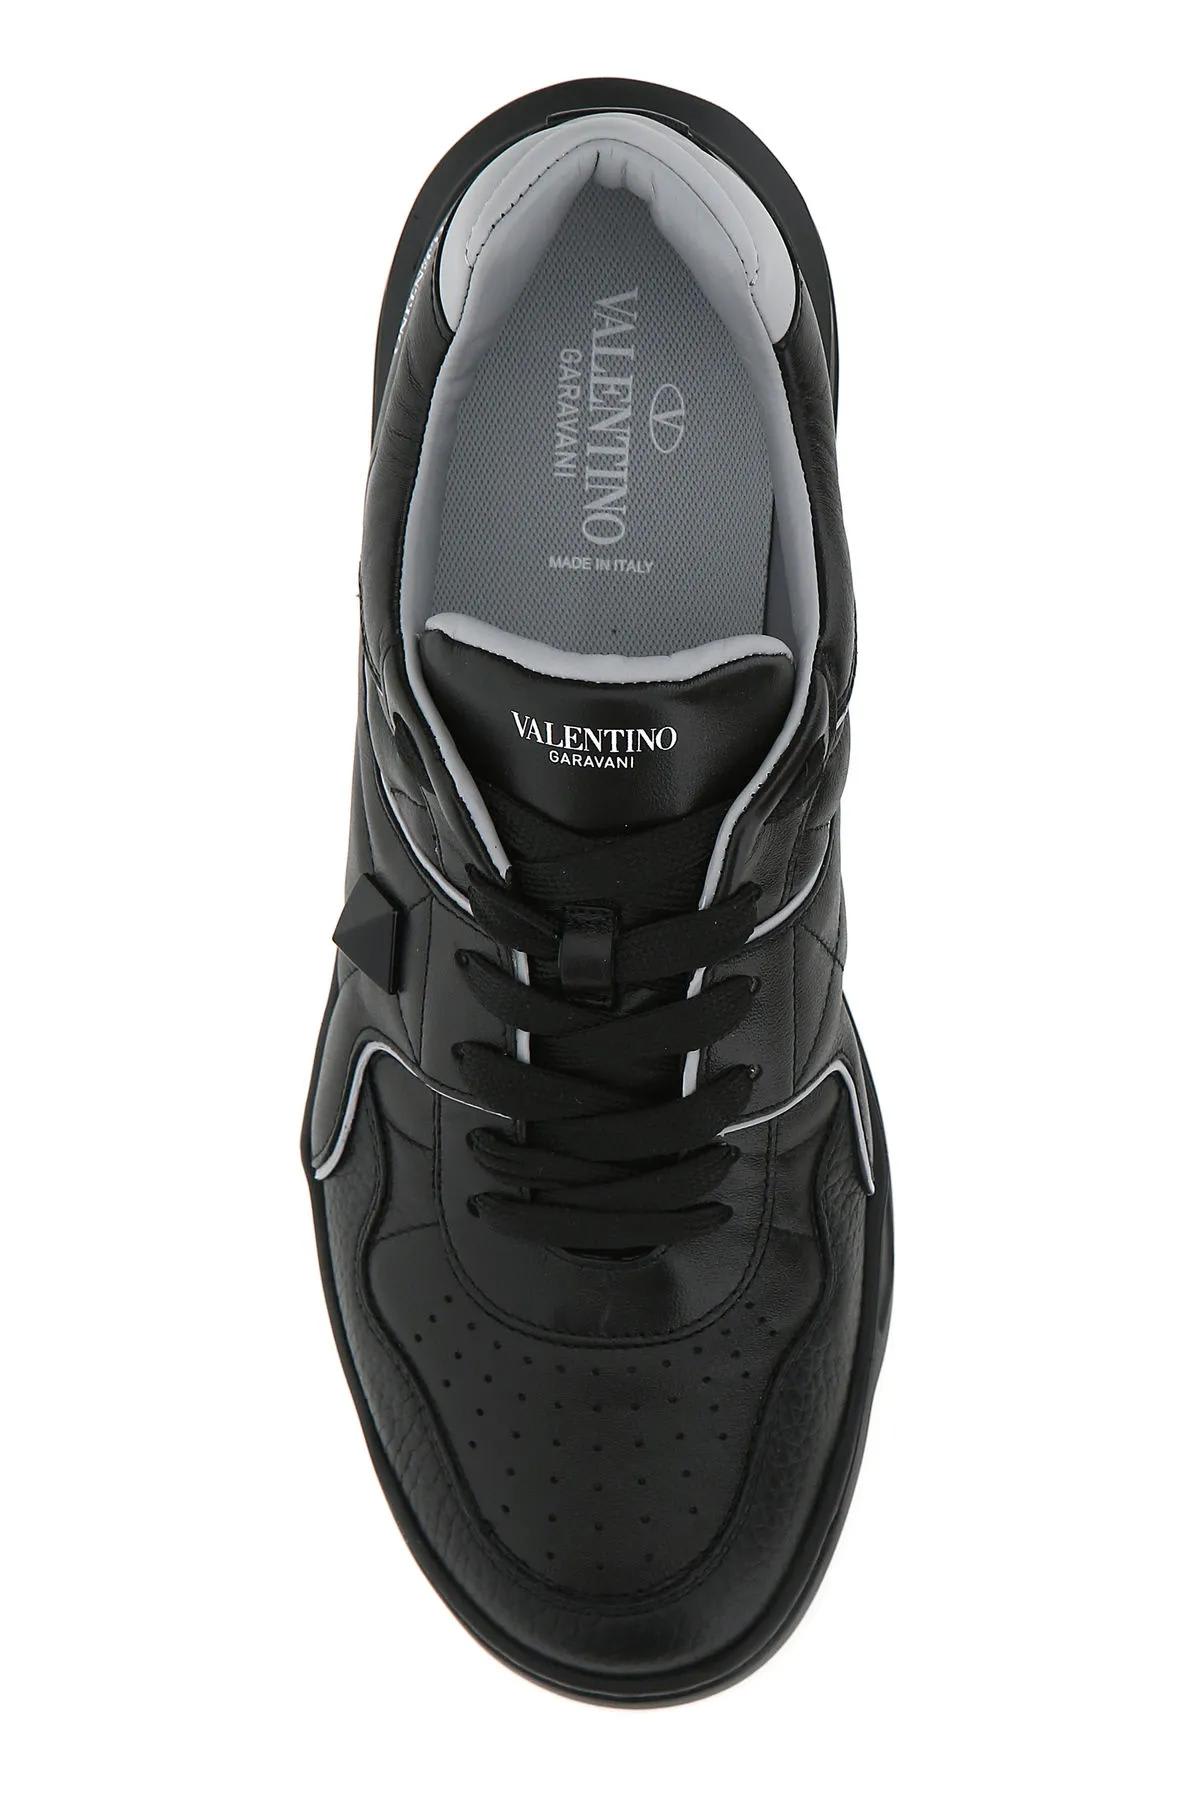 Shop Valentino Black Nappa Leather One Stud Sneakers